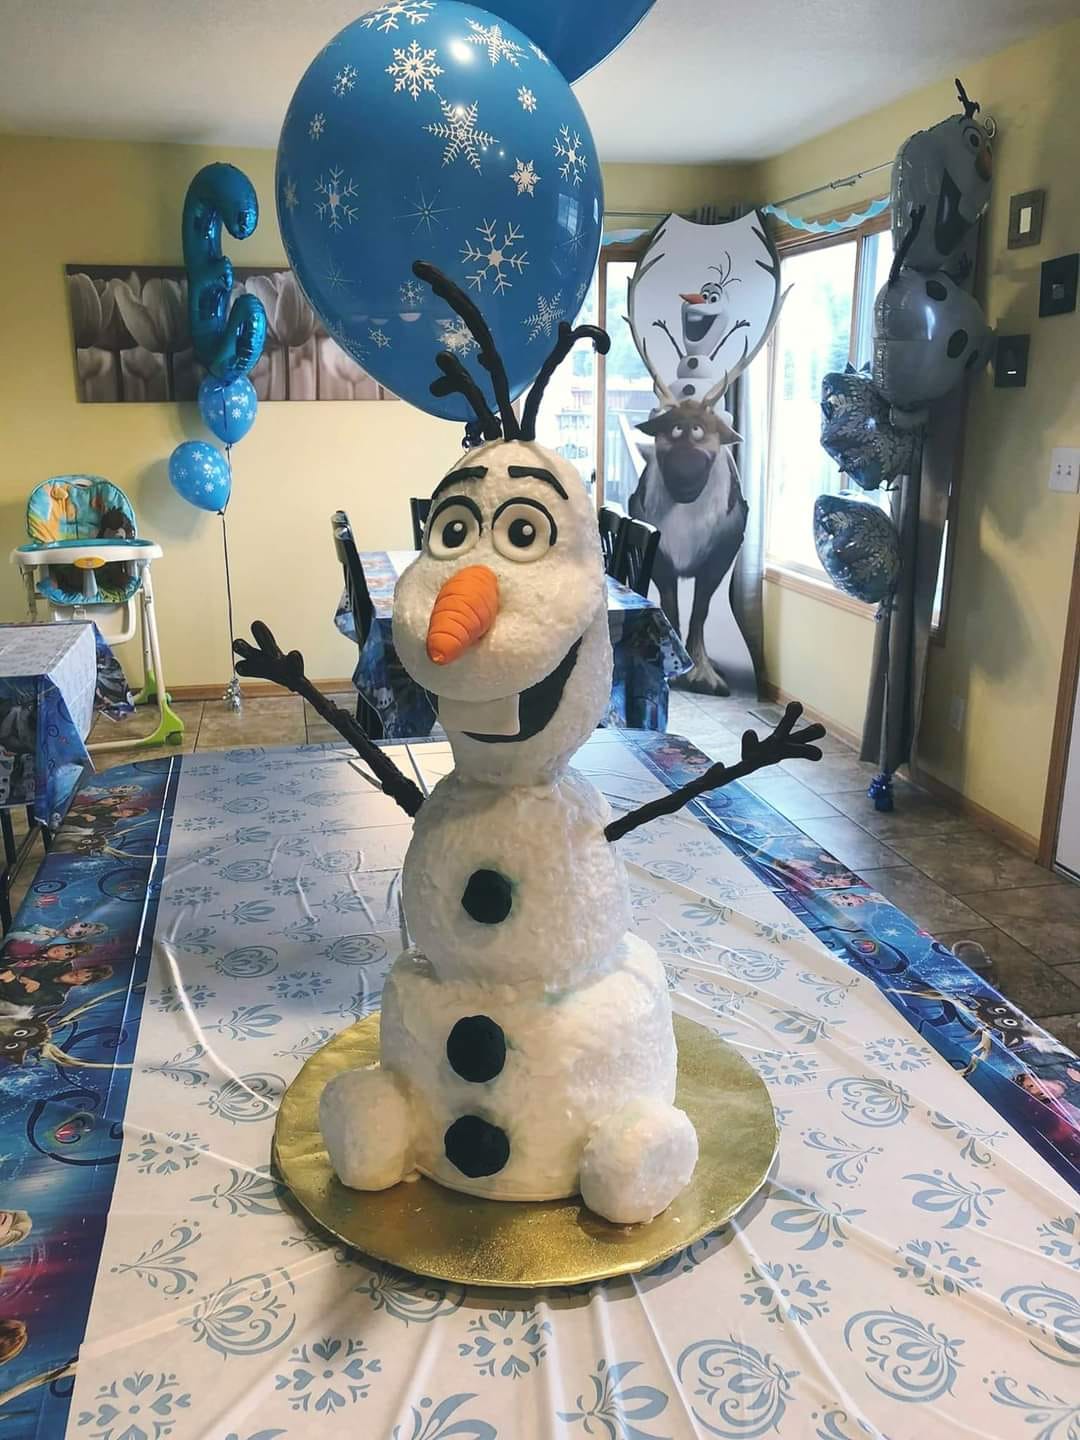 Custom frozen olaf cake is sitting on a table in a room.